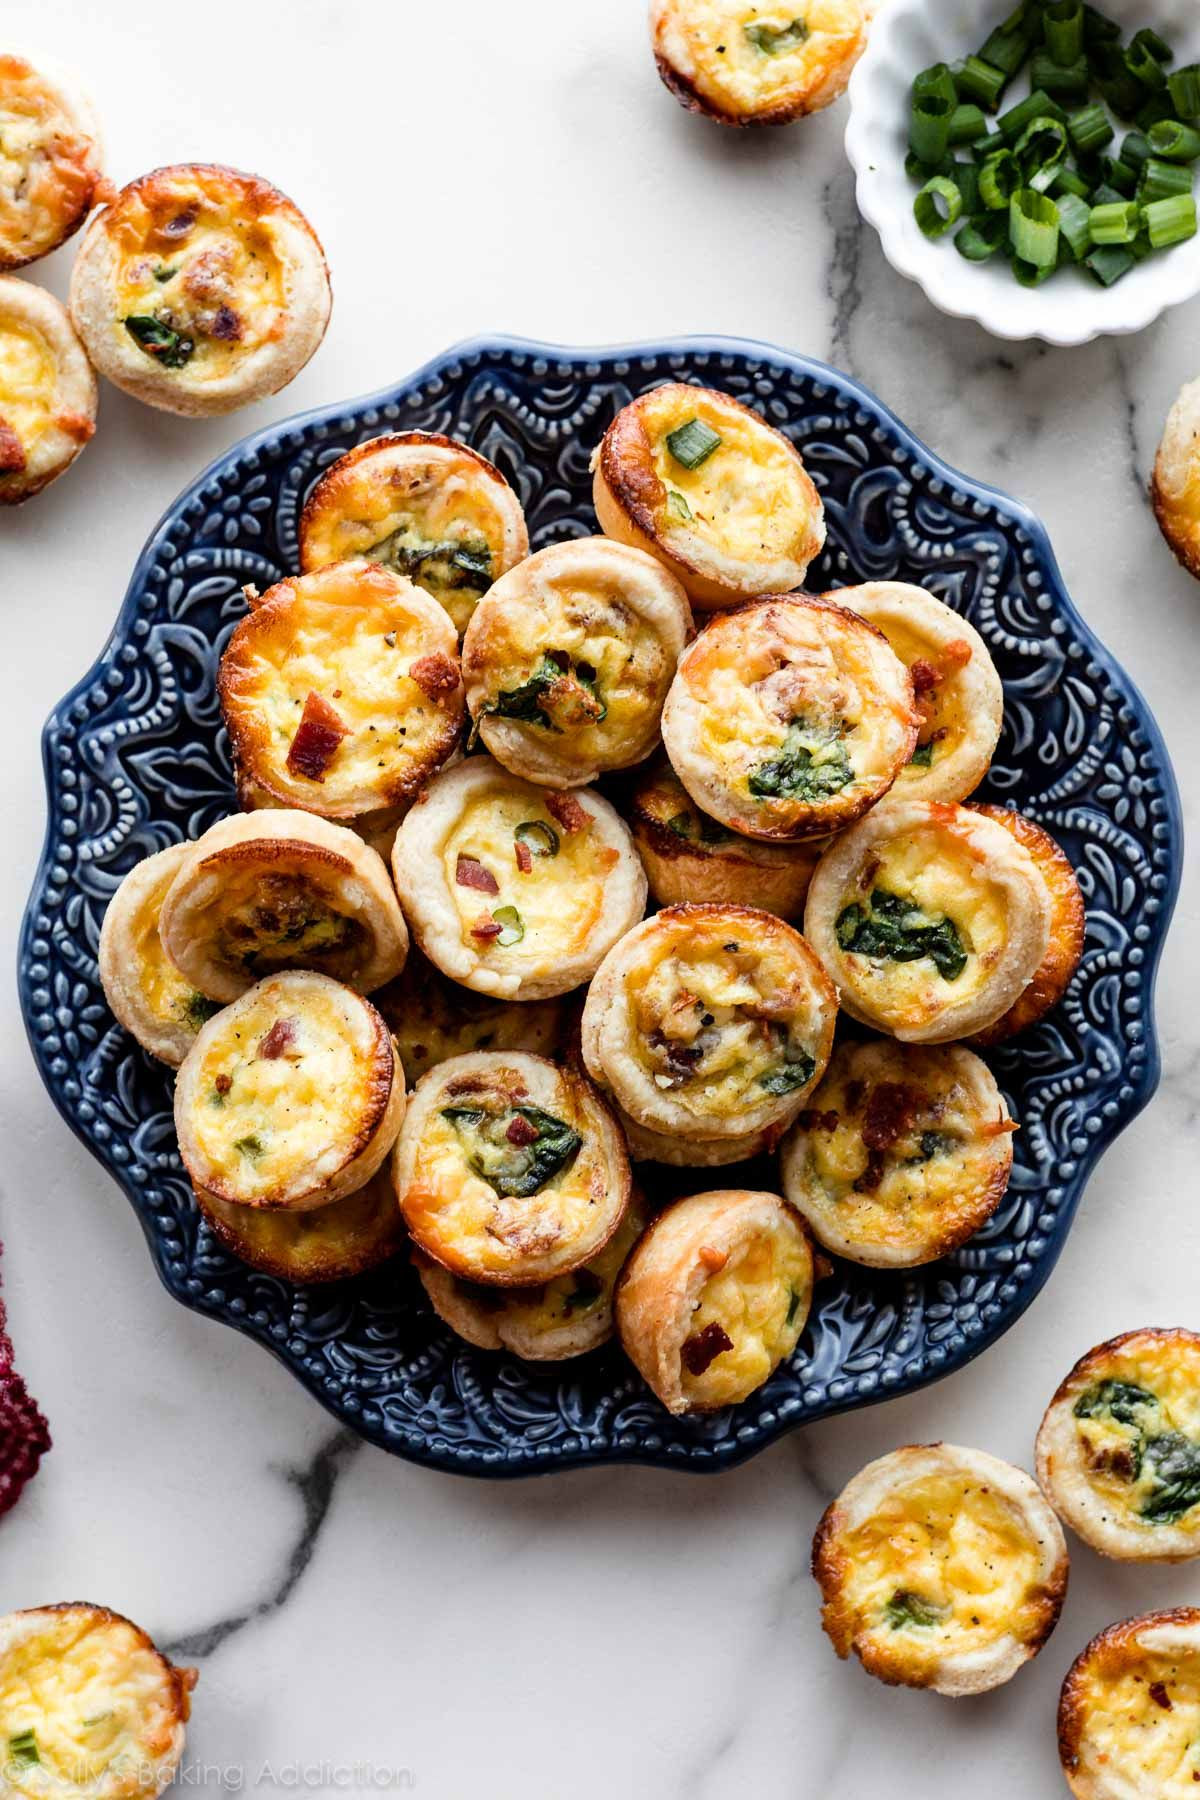 Appetizer Recipes Using Pie Crust
 Learn how to make the BEST mini quiche using my favorite